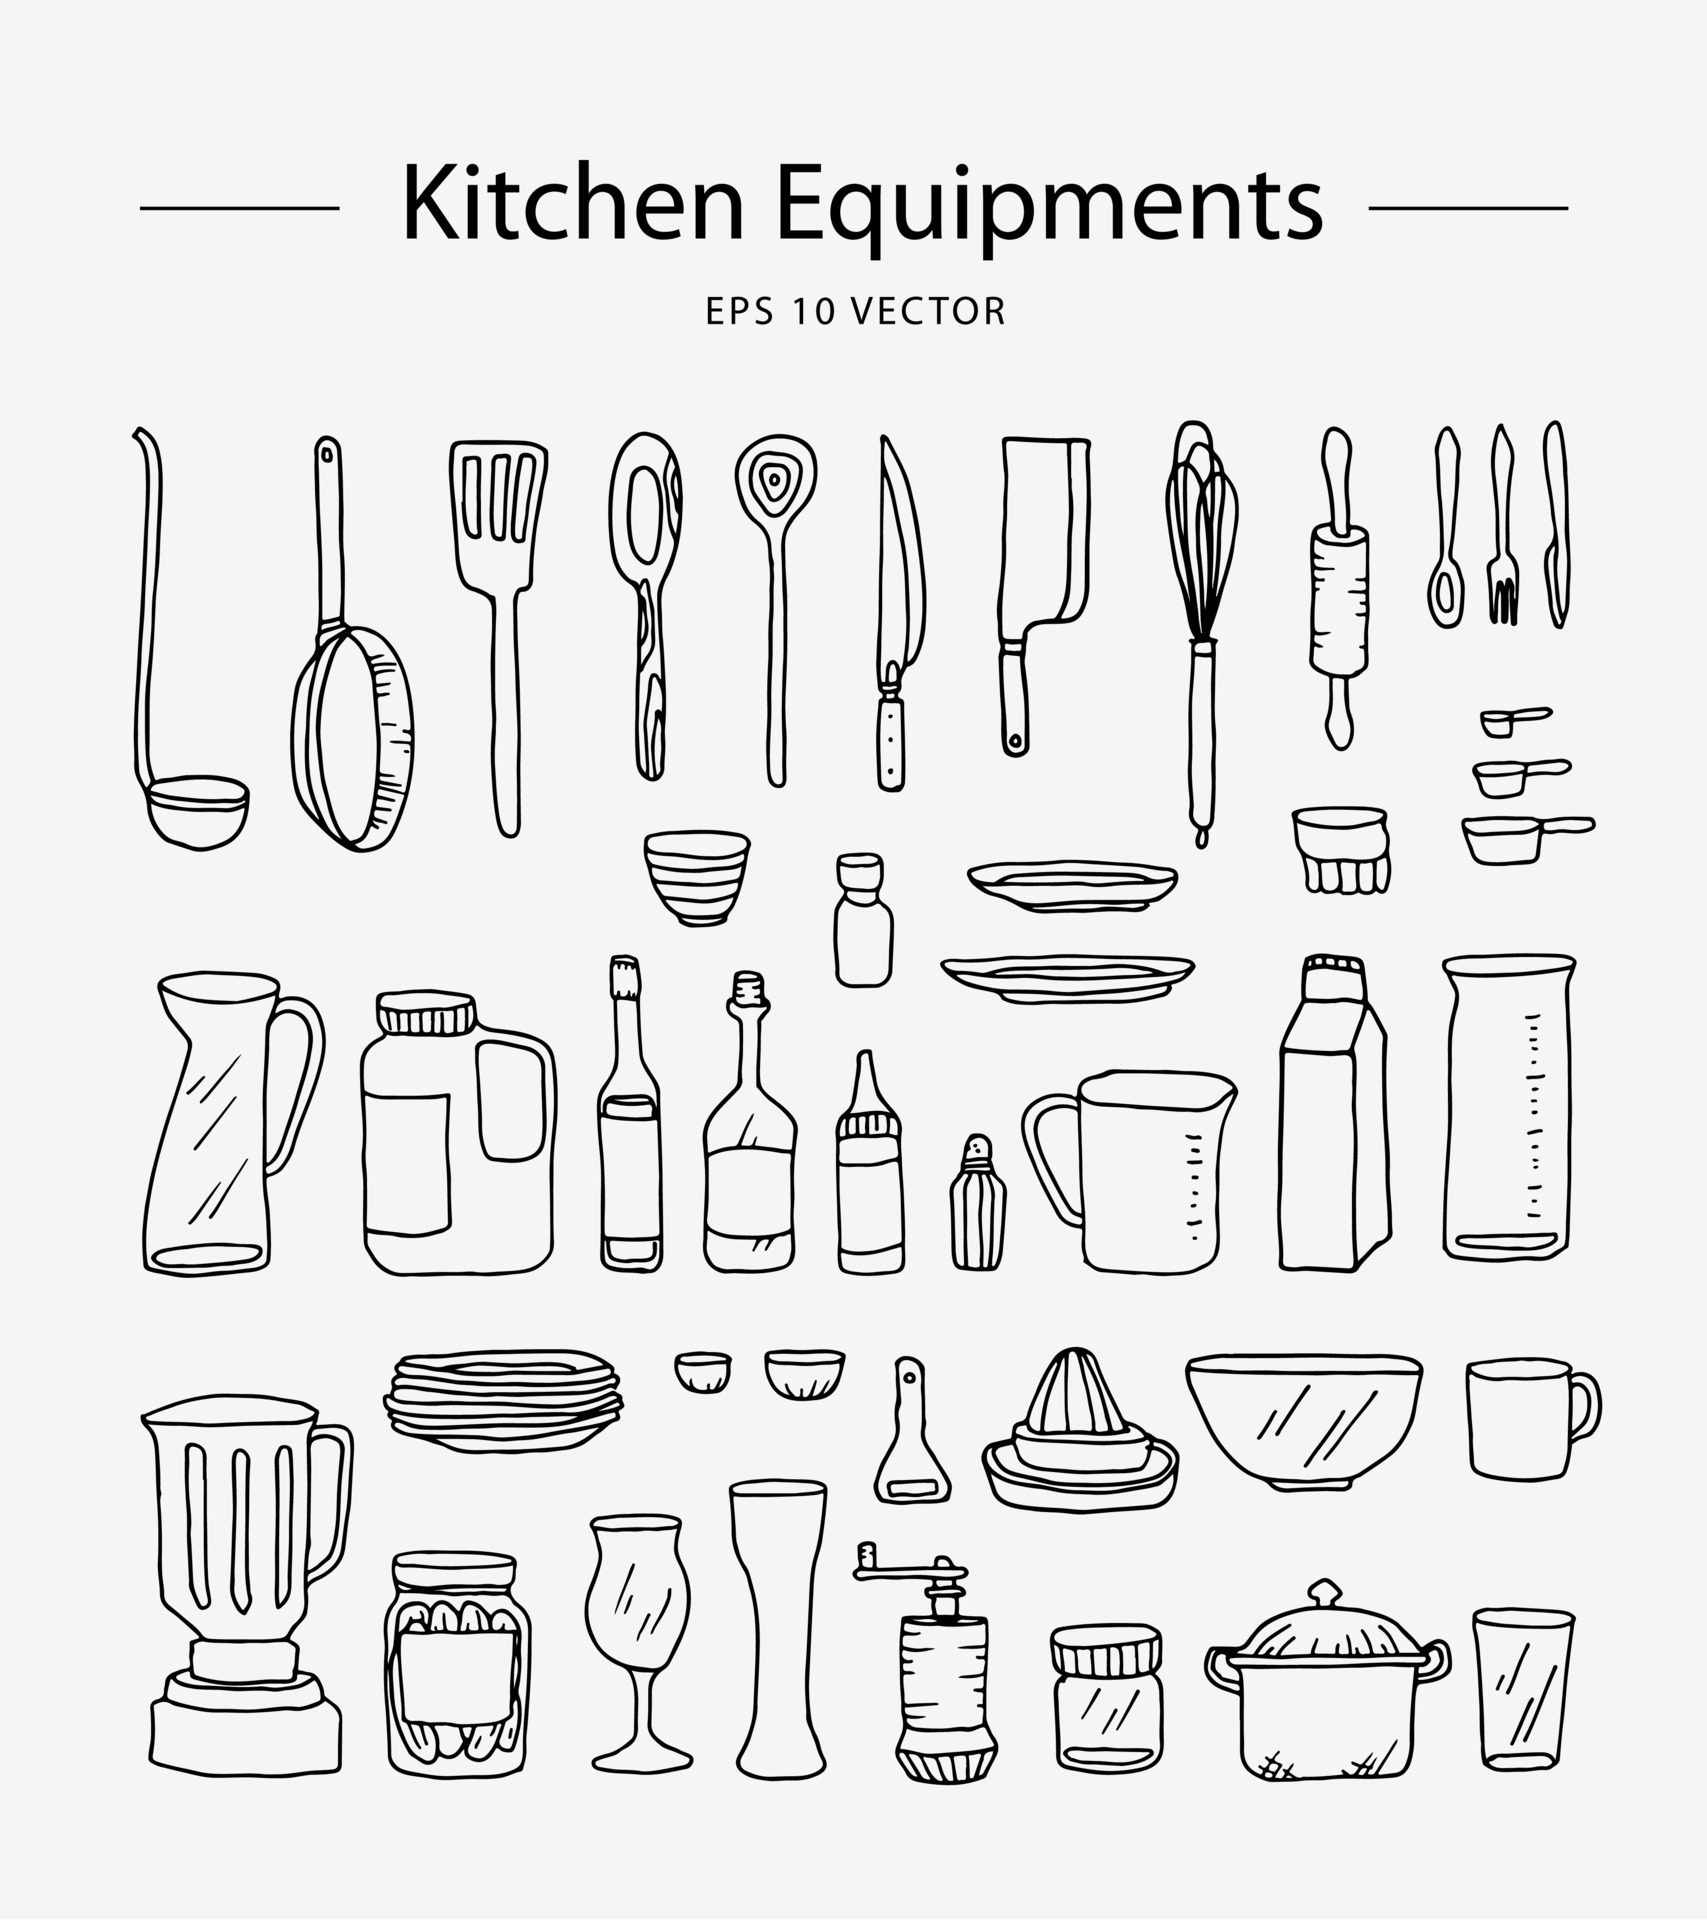 https://static.vecteezy.com/system/resources/previews/004/925/523/original/a-set-of-kitchen-objects-line-illustration-free-vector.jpg